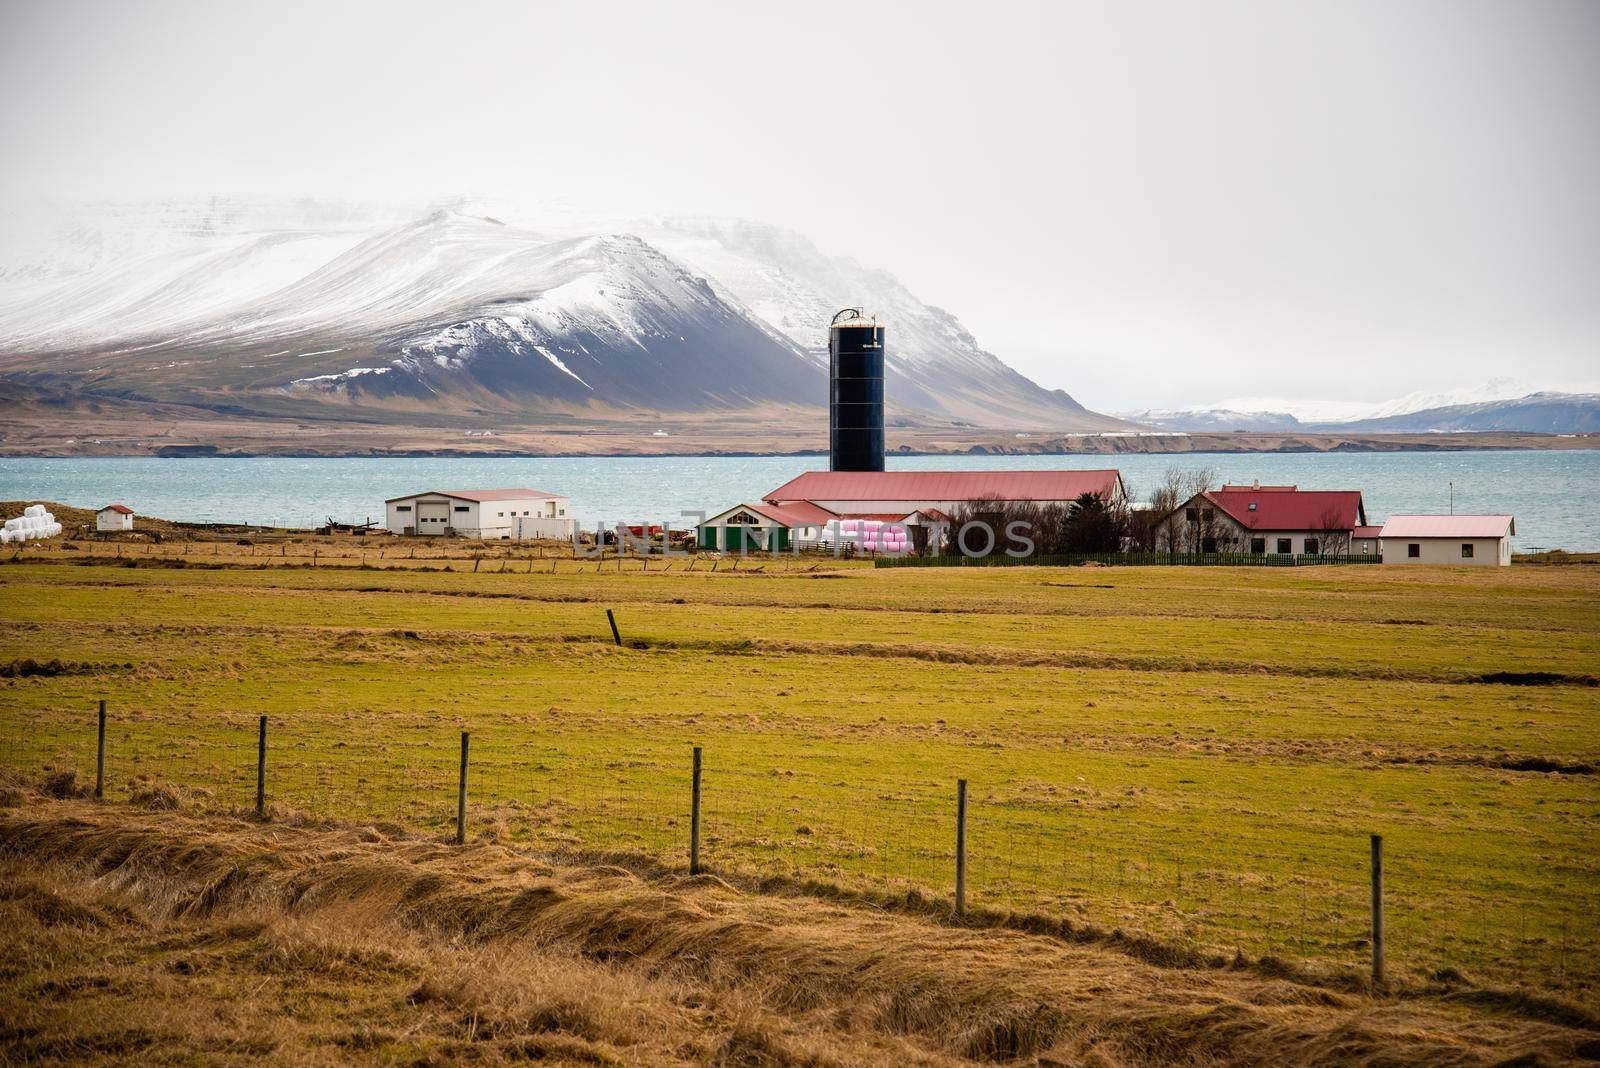 Iceland pasture leads into a gorgeous red barn with silo with magical snow capped mountains in the background